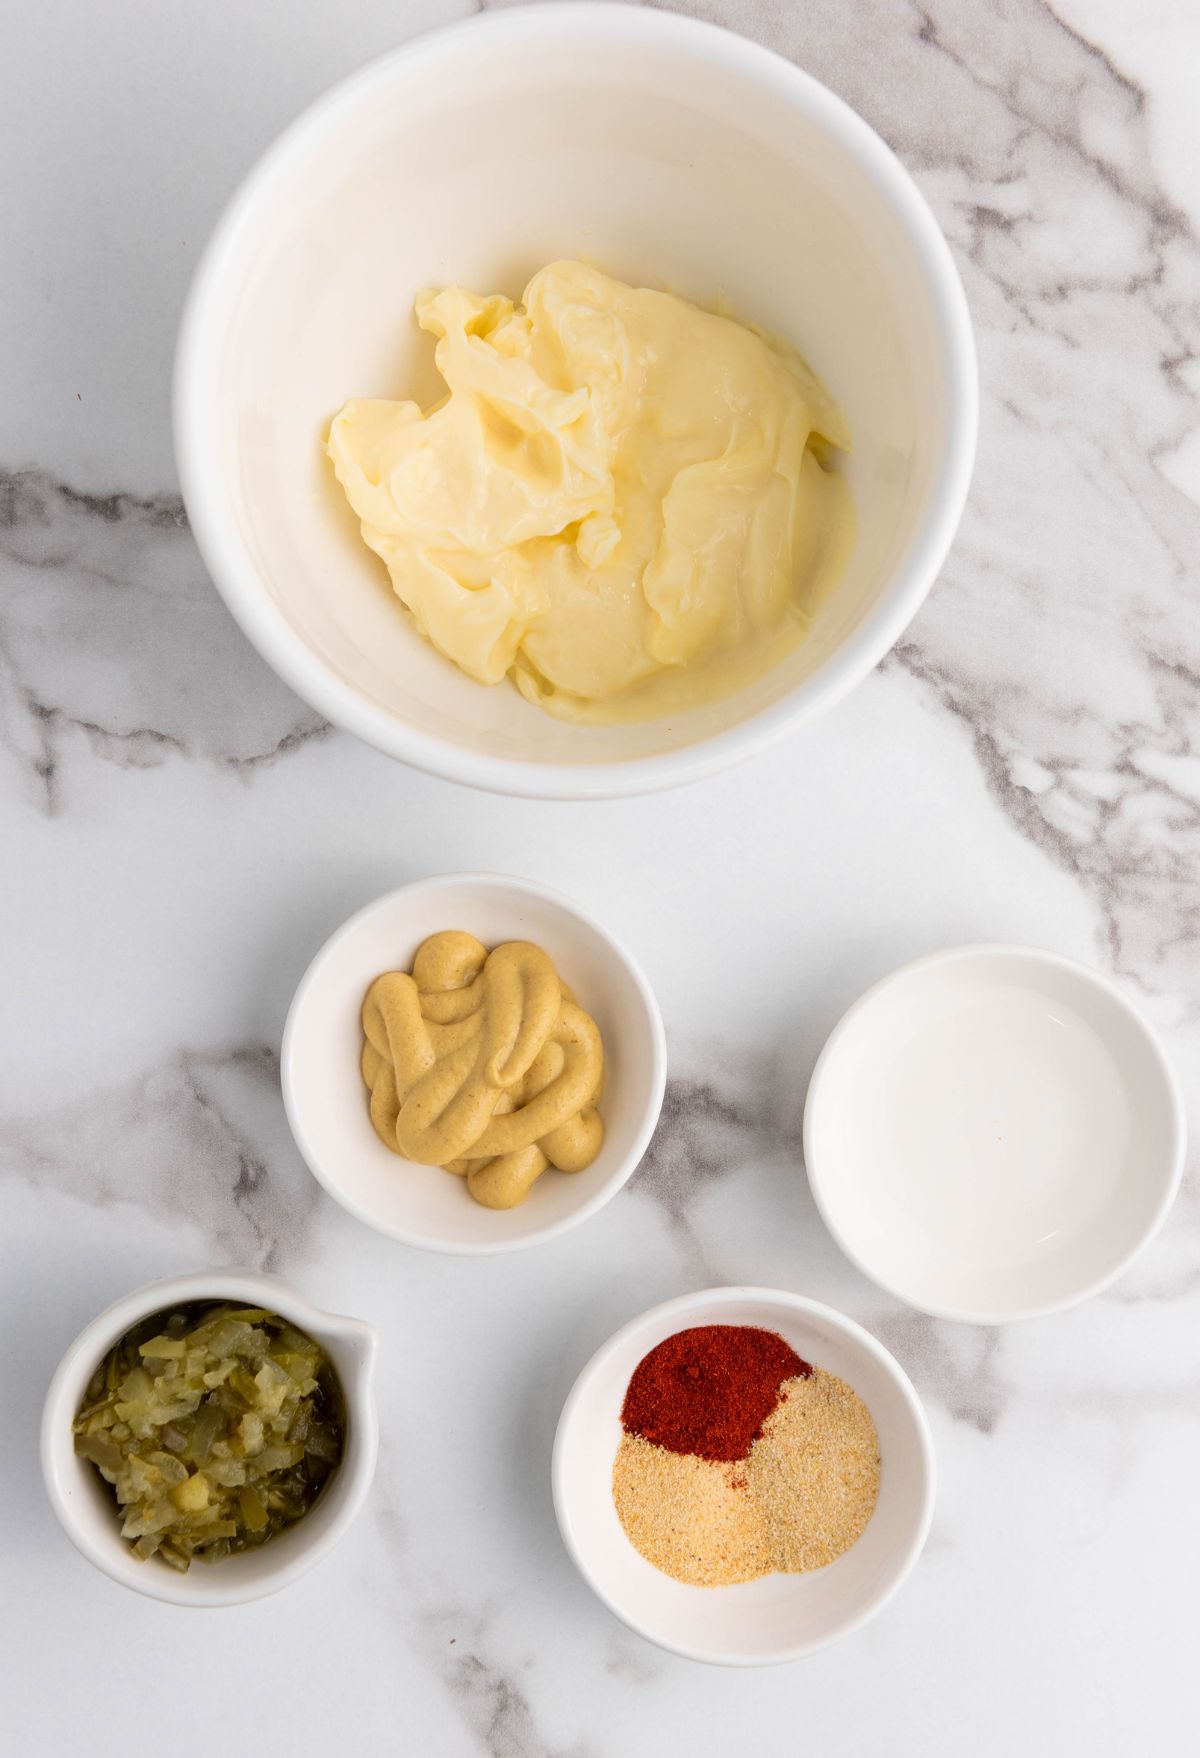 A bowl of butter, mustard, and other ingredients on a marble countertop.